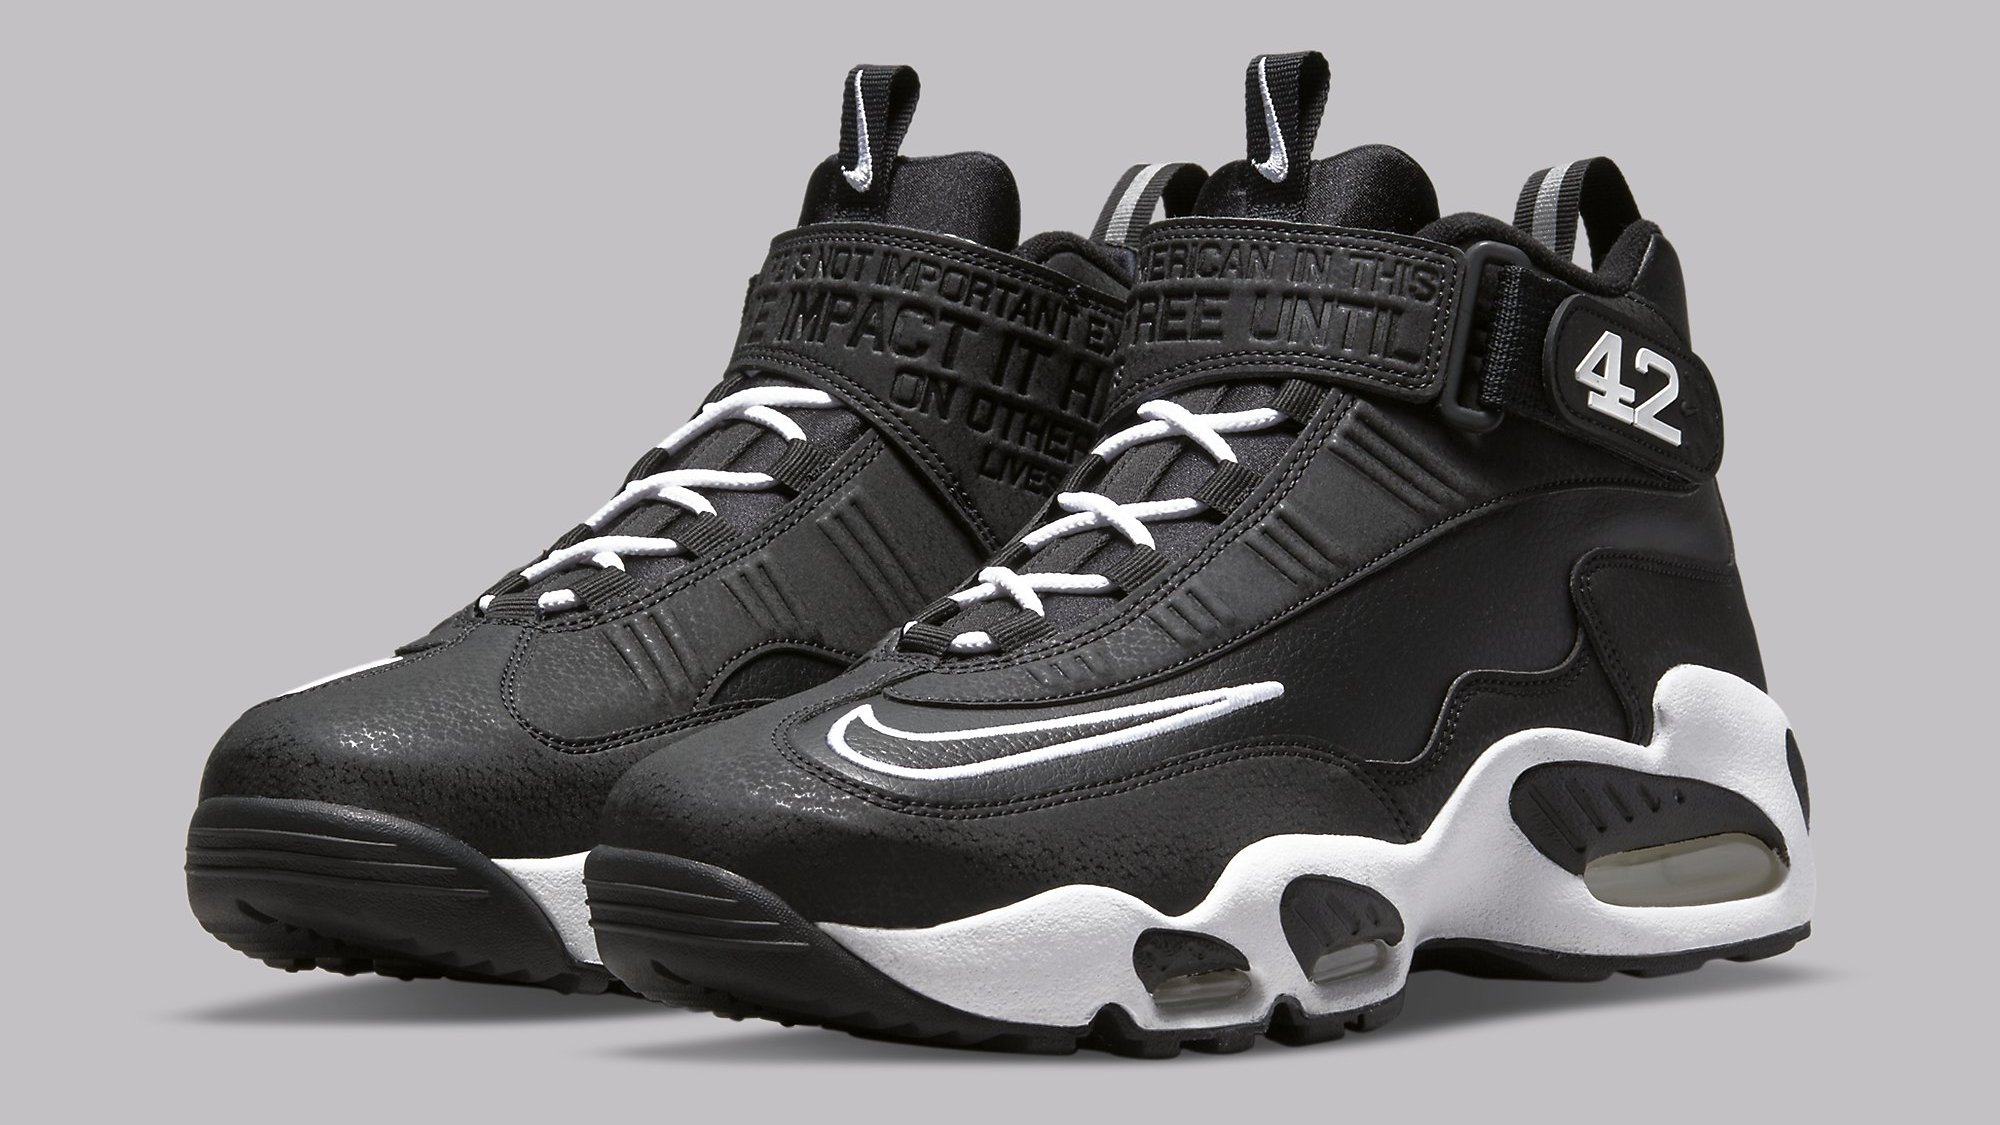 Ken Griffey Jr. Honors Jackie Robinson With This Nike Air Griffey